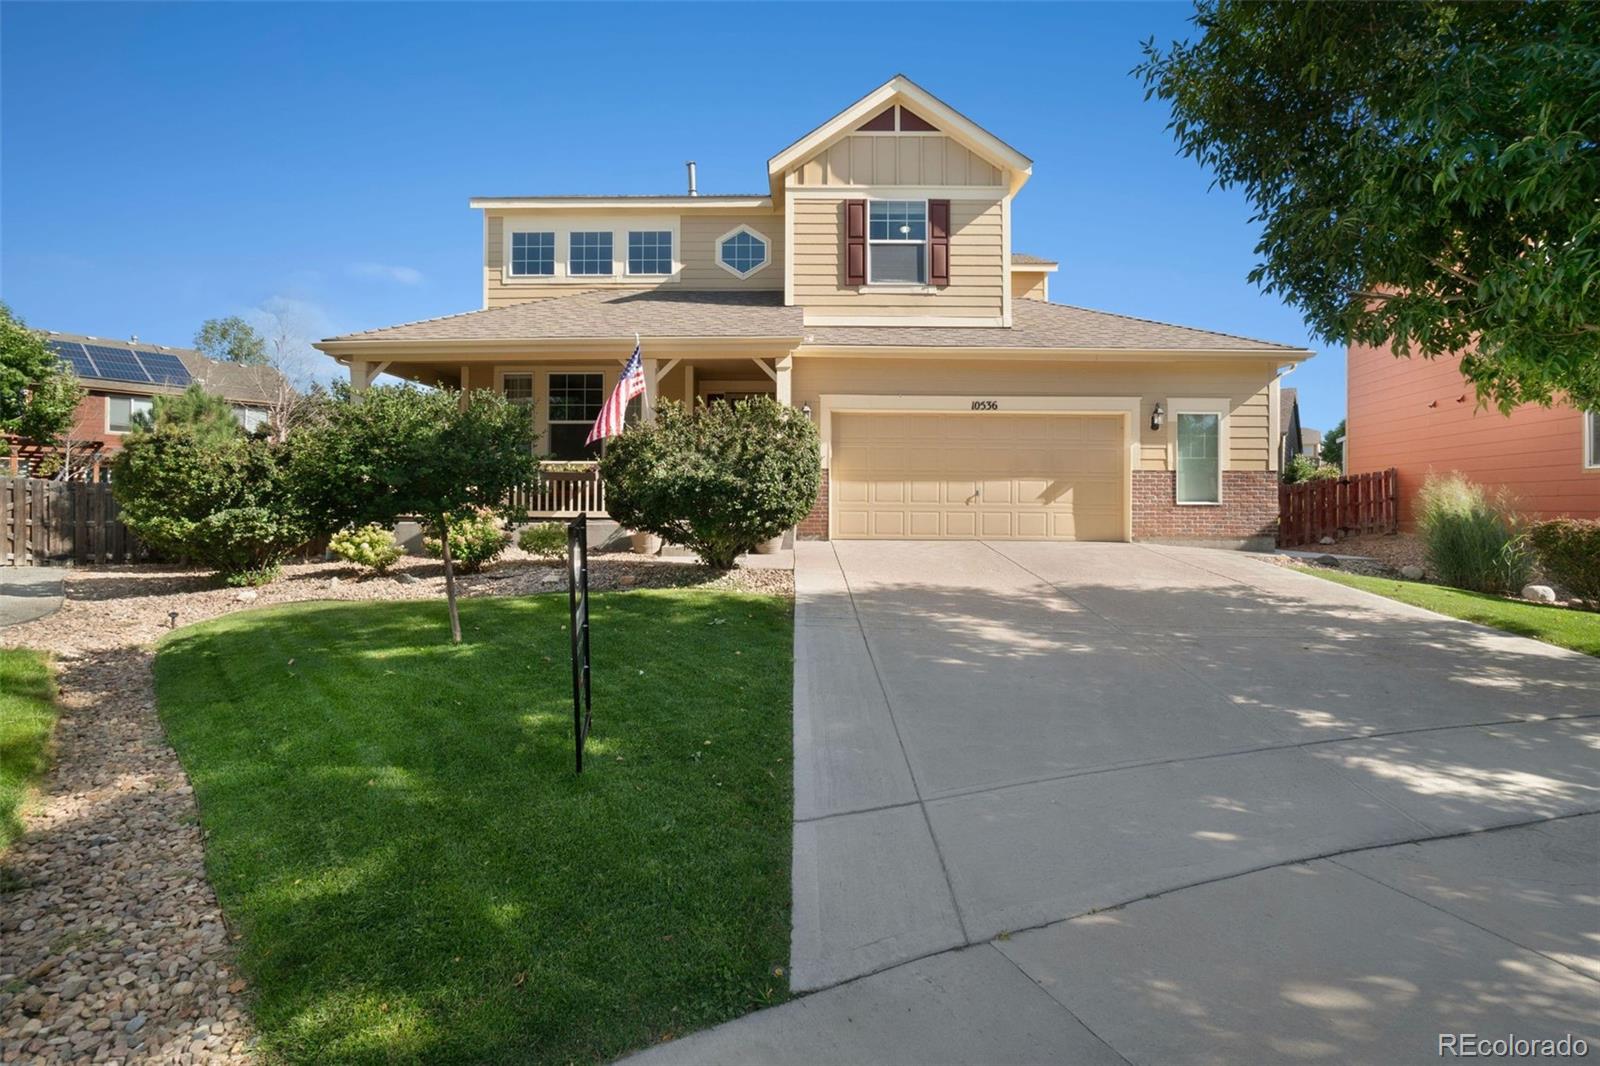 10536  Troy Way, commerce city MLS: 4202926 Beds: 3 Baths: 3 Price: $600,000